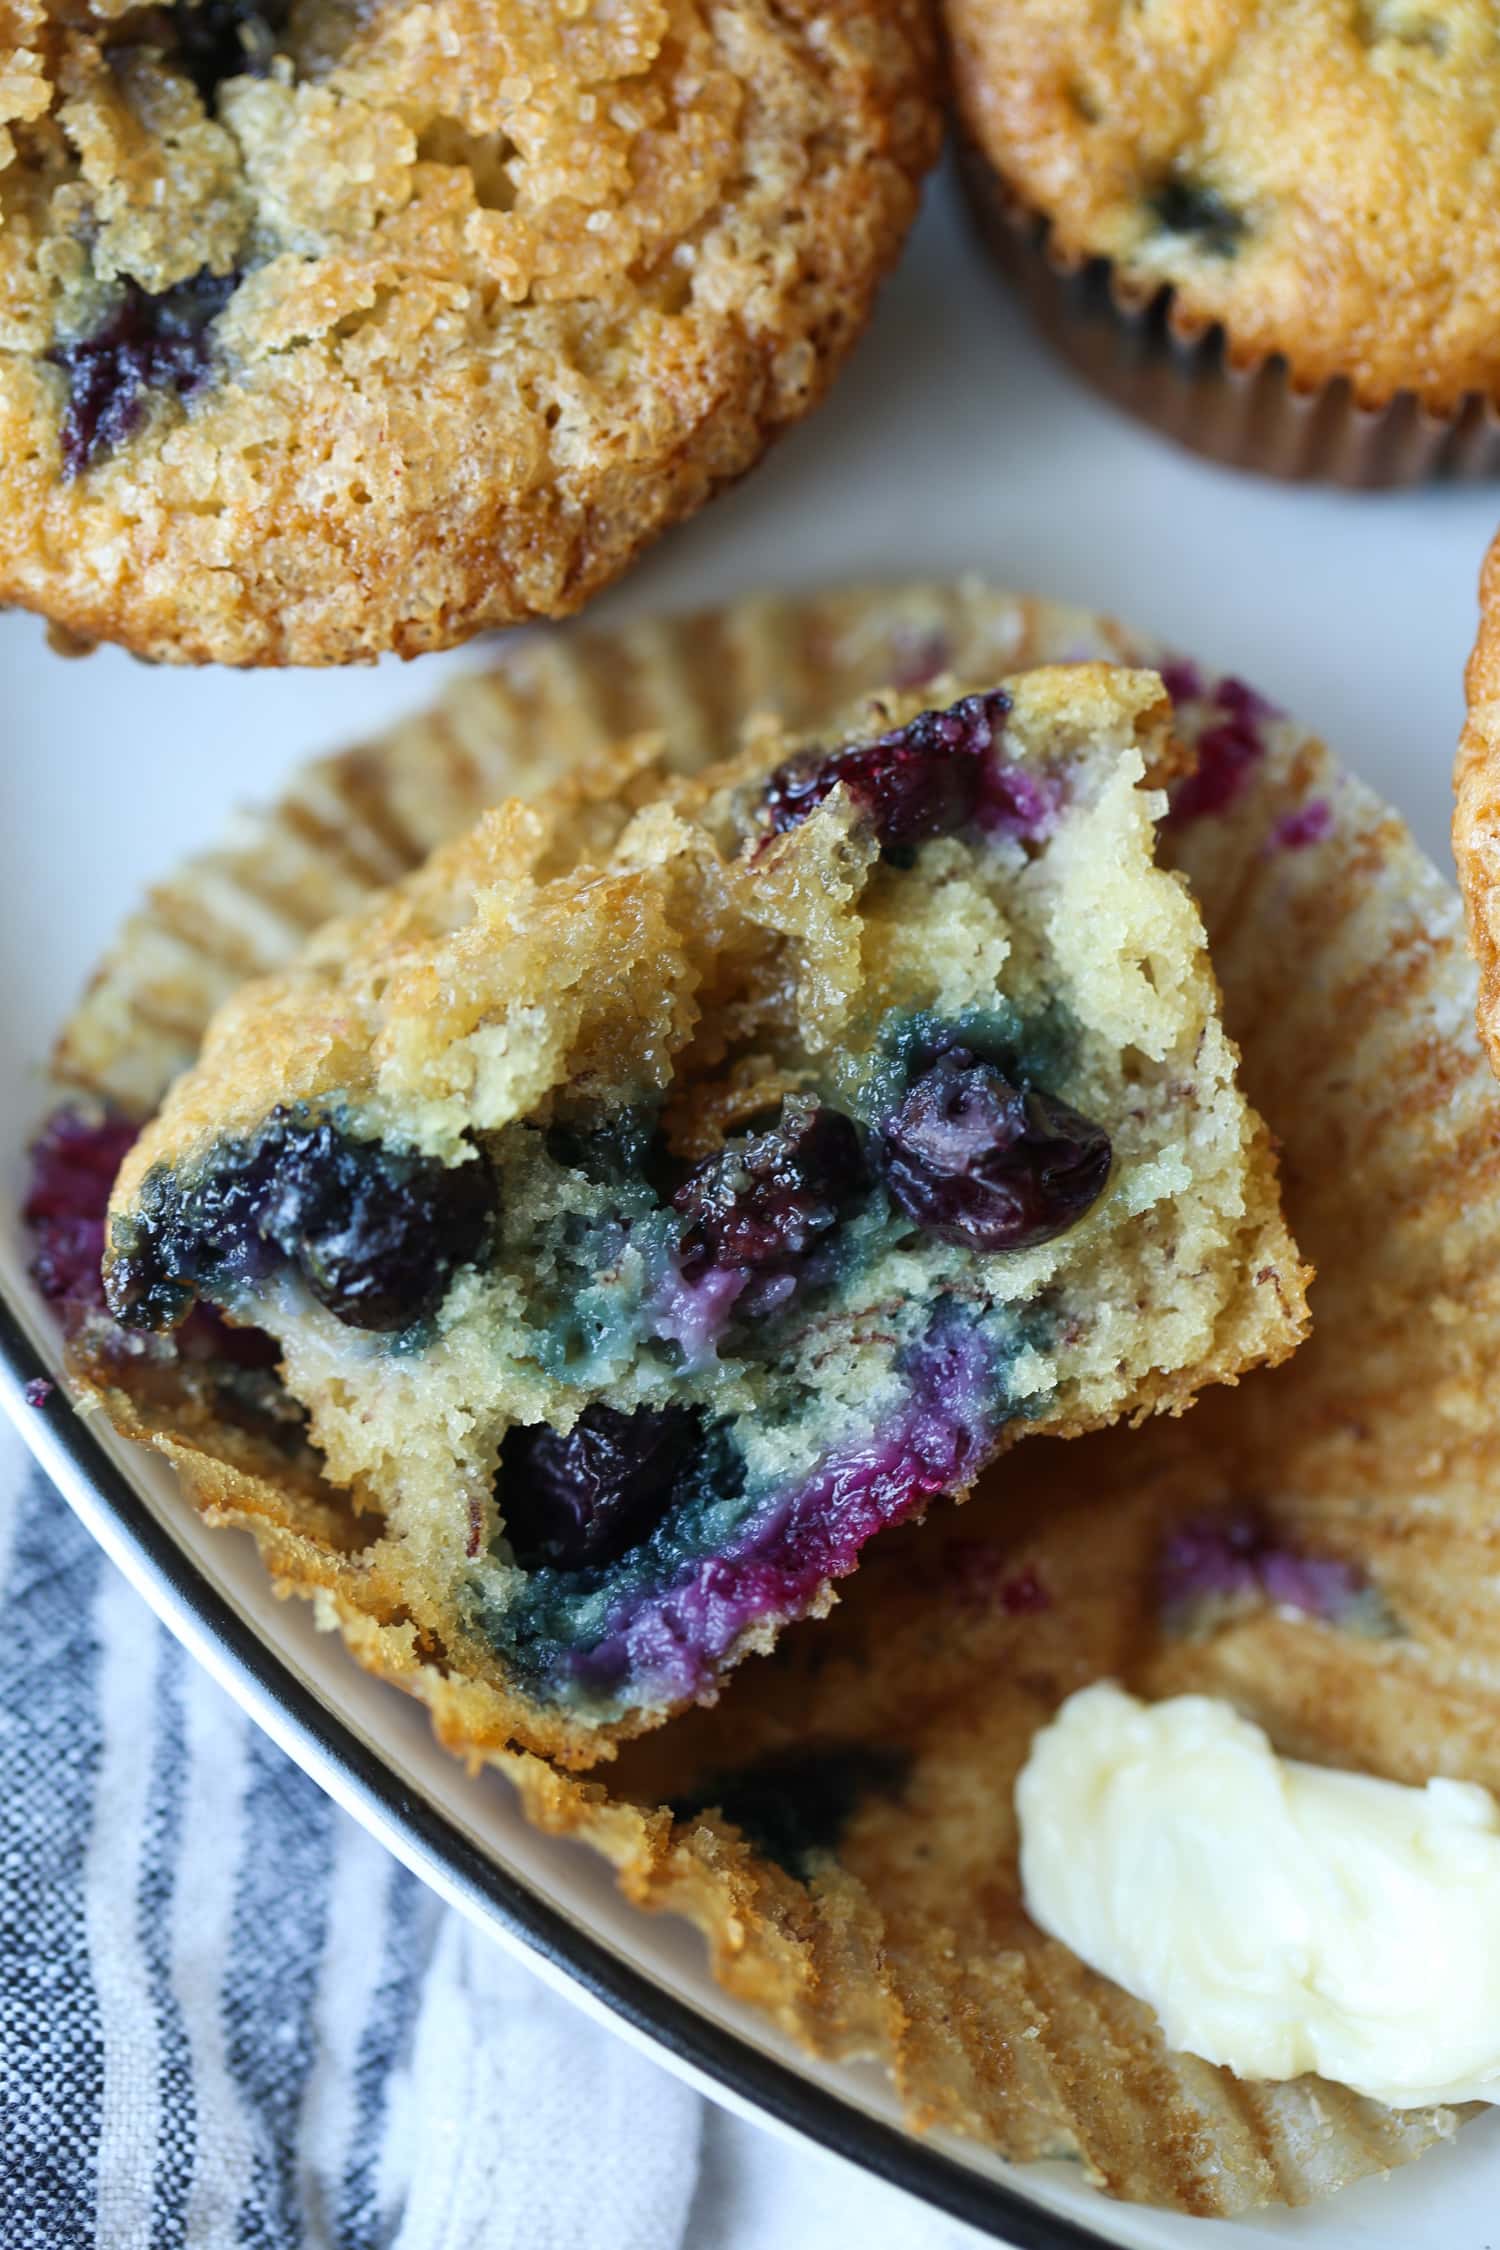 Half of a muffin with fresh blueberries in it.